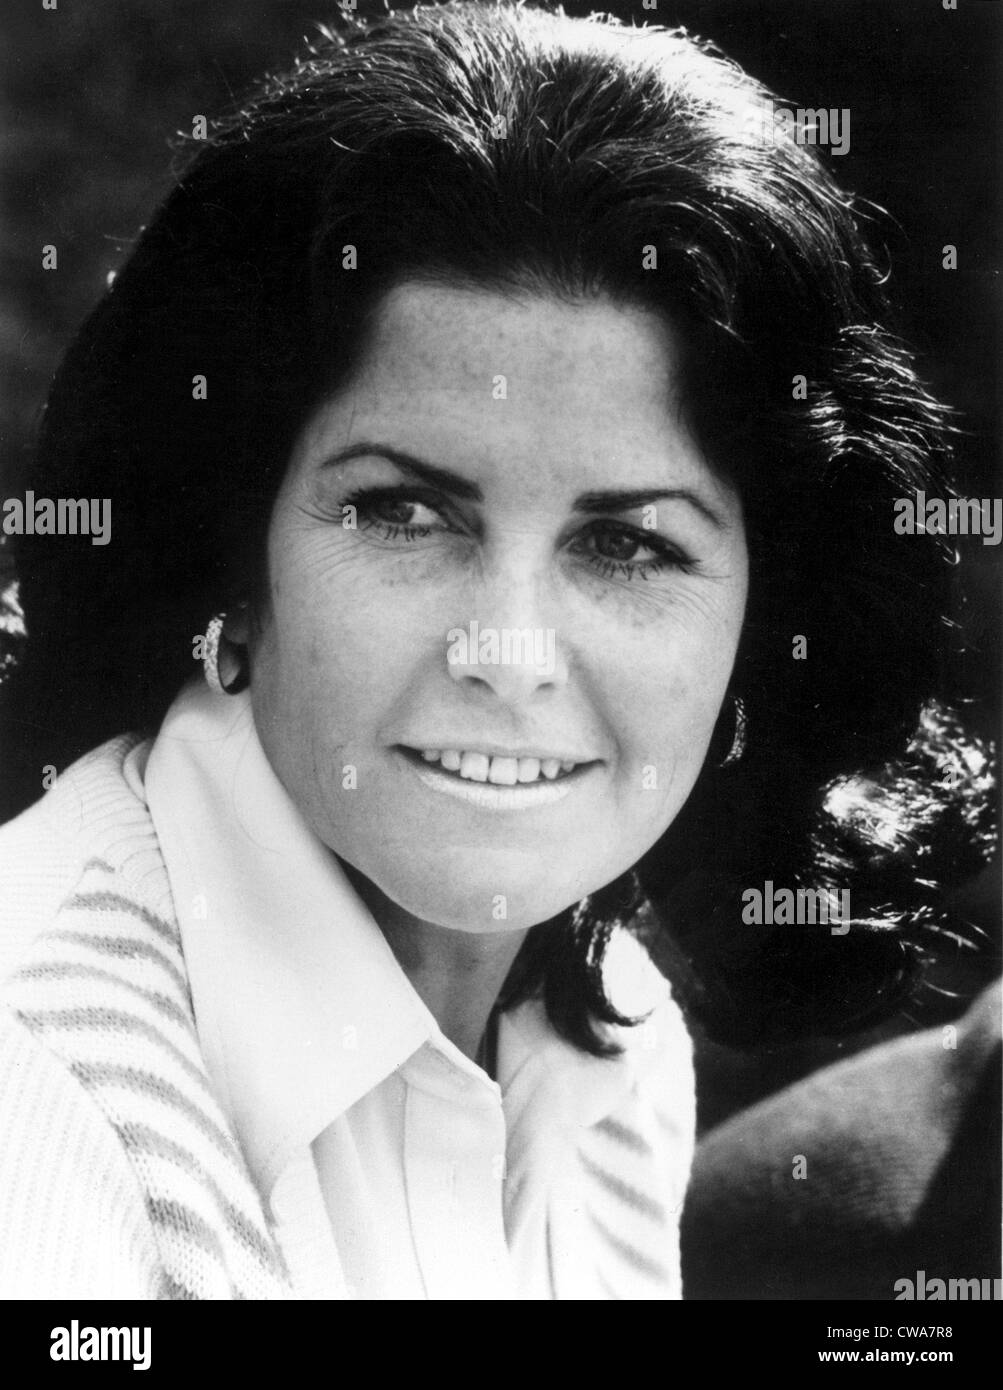 Judith Exner, former mistress of JFK, in a 1978 portrait.. Courtesy: CSU Archives / Everett Collection Stock Photo